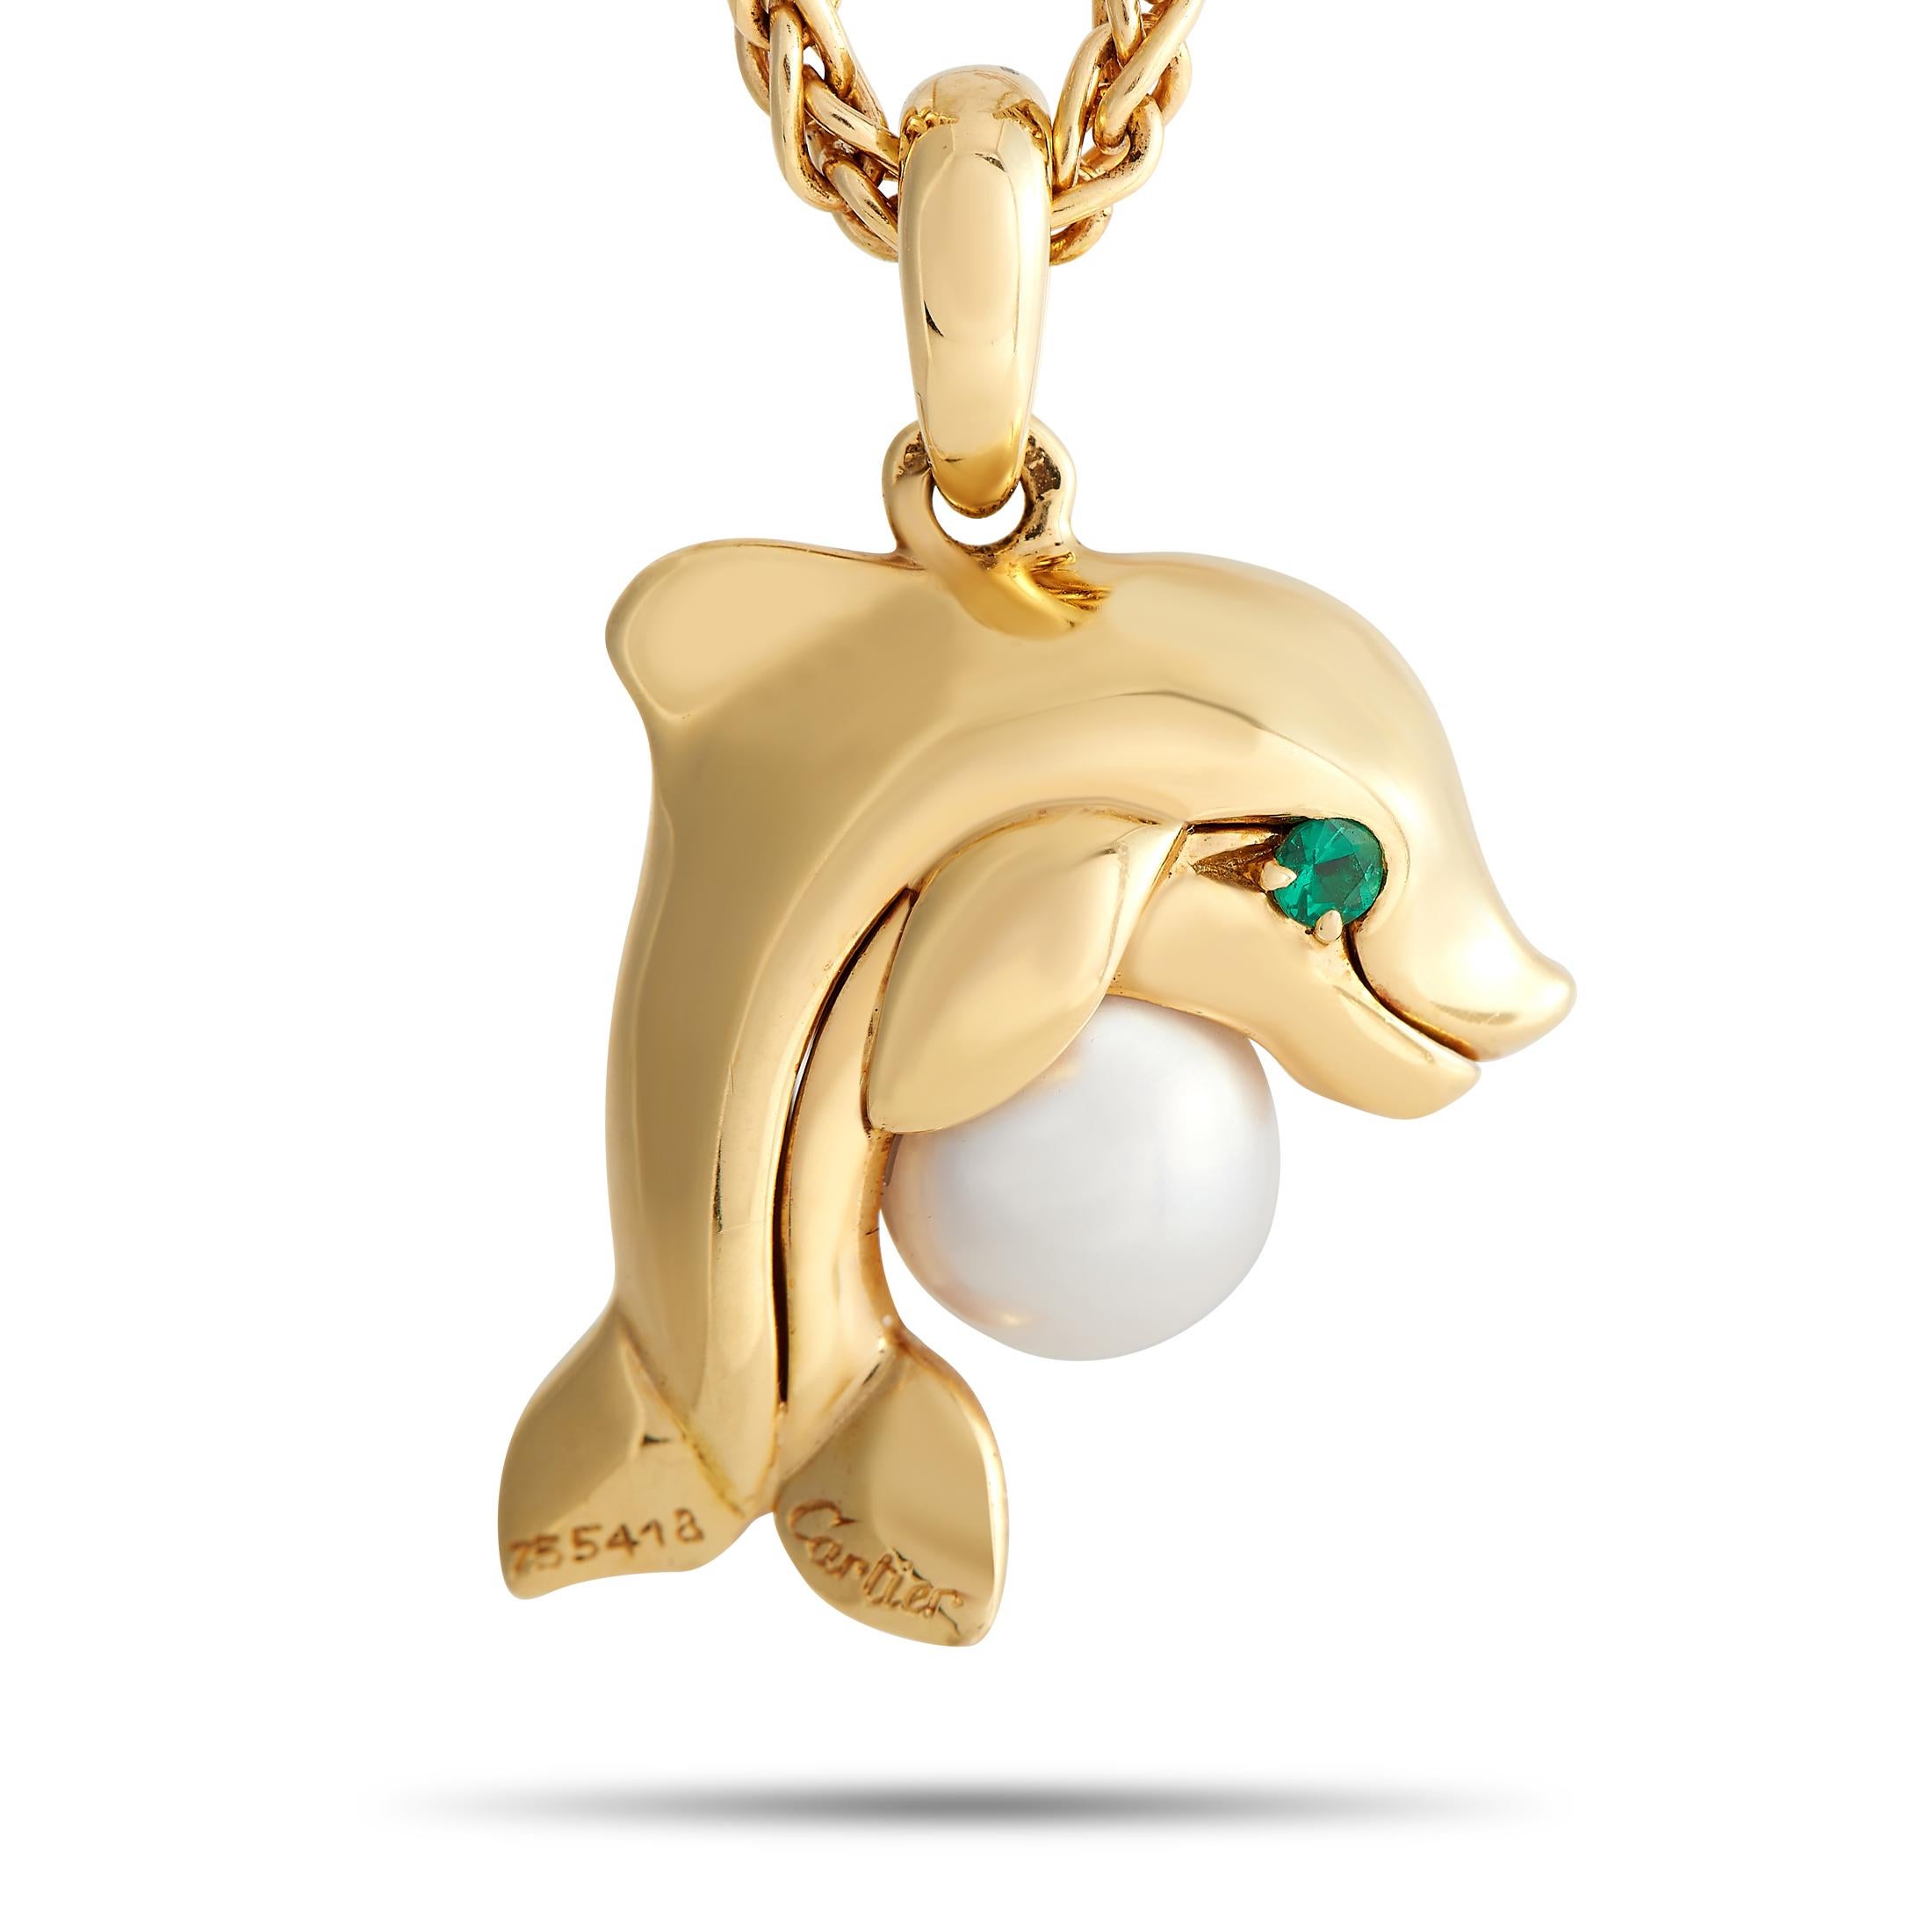 This 18K Yellow Gold Cartier necklace is incredibly captivating. Suspended from a sleek 16” chain, you’ll find a dolphin-shaped pendant accented by green gemstone eyes and a stunning pearl accent. It measures 1” long and 0.75” wide - the perfect